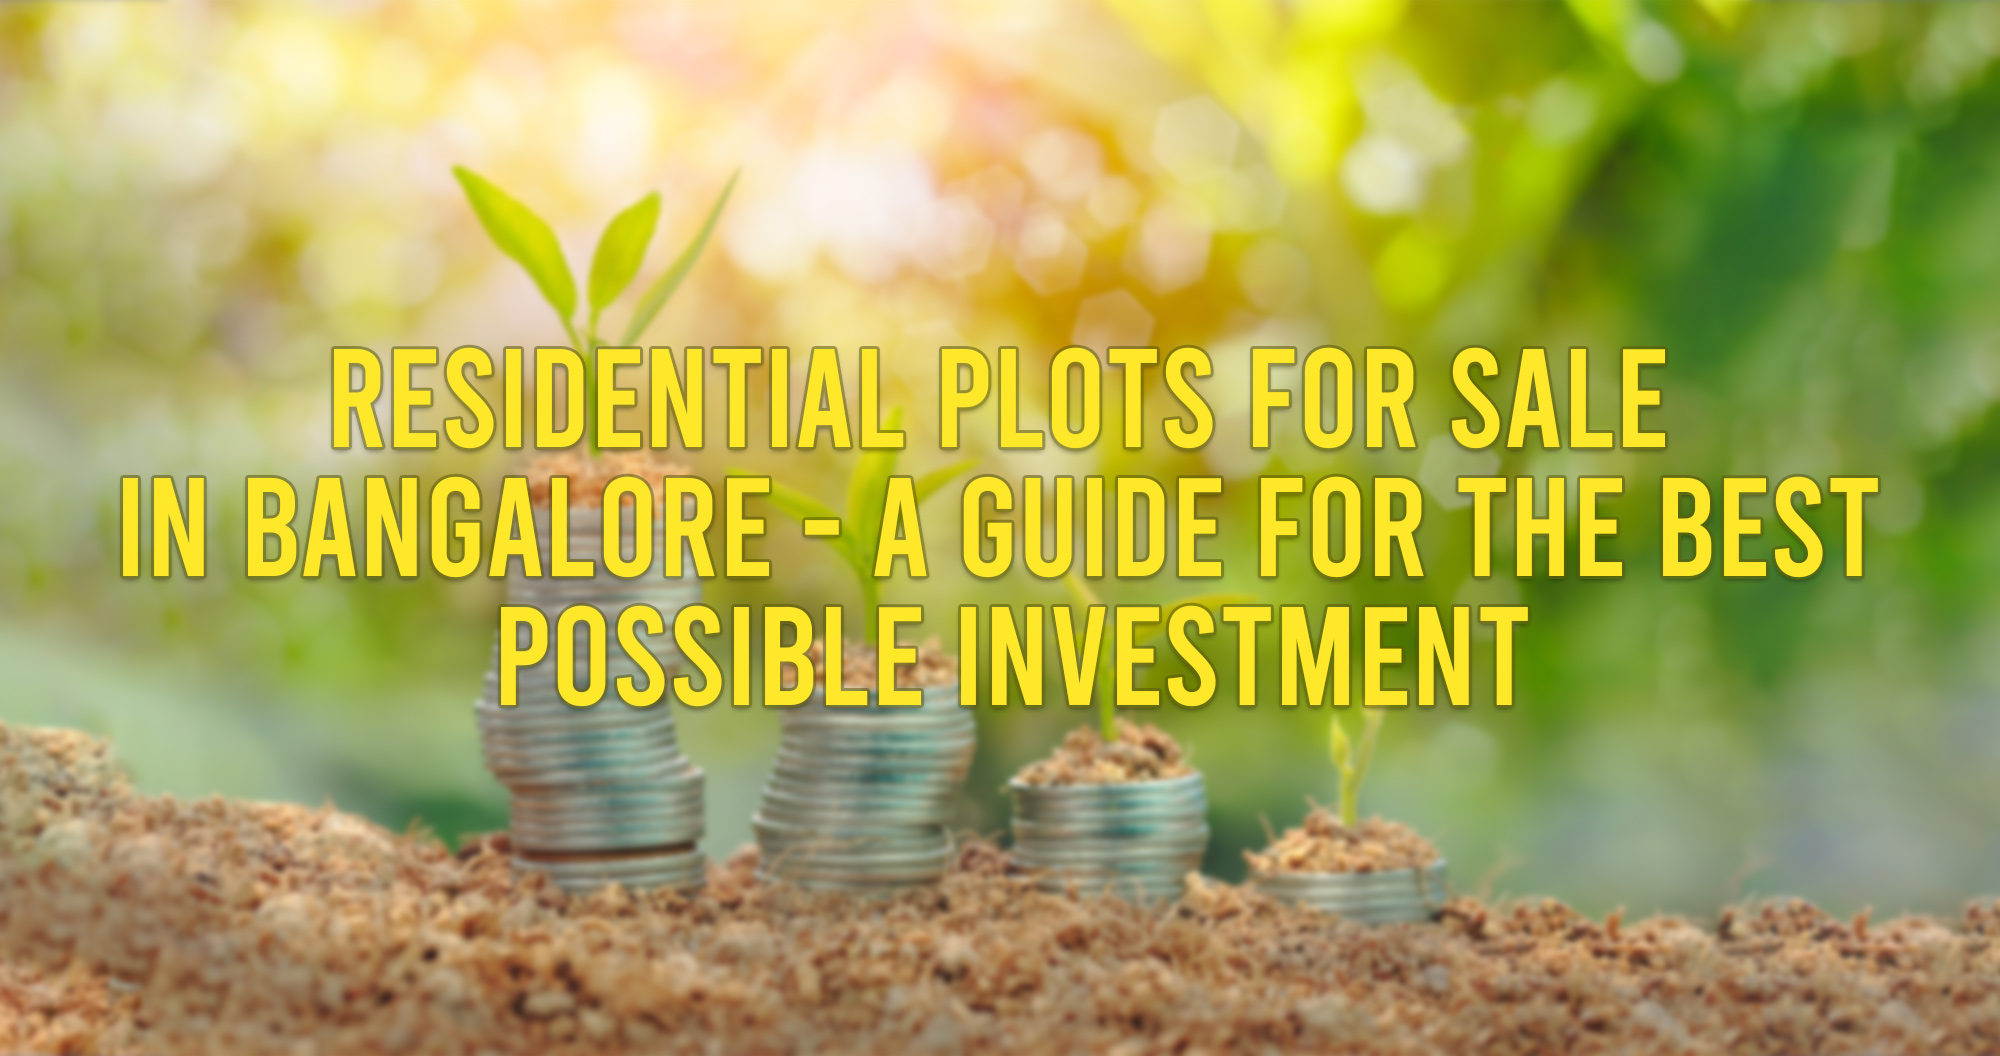 Residential Plots For Sale in Bangalore - A Guide for the Best Possible Investment